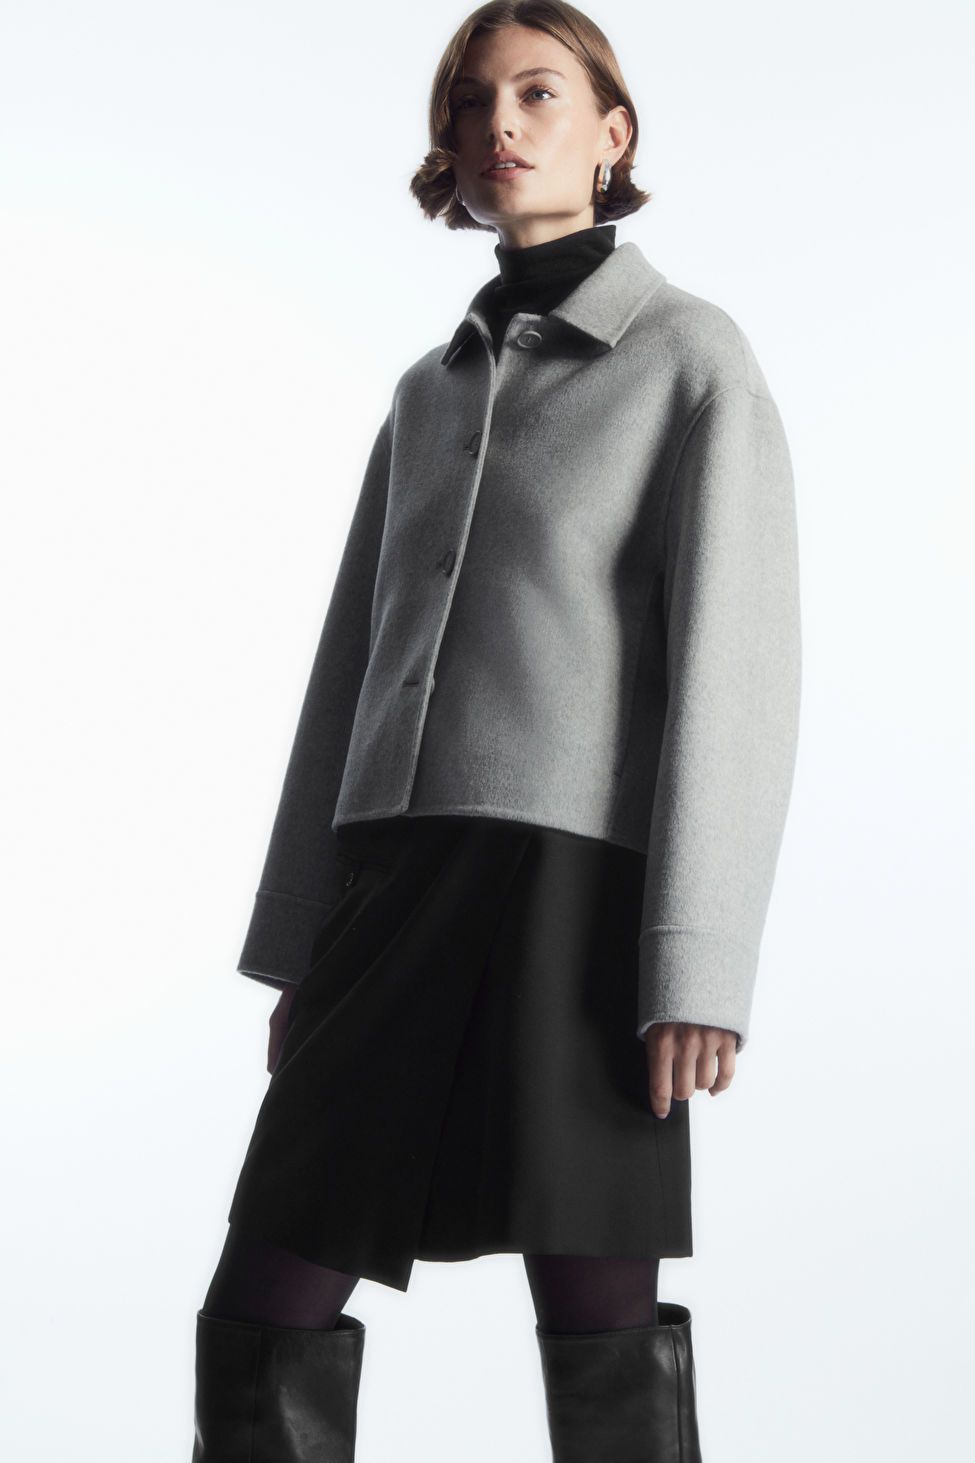 BOXY DOUBLE-FACED WOOL JACKET - LIGHT GREY - COS | COS UK